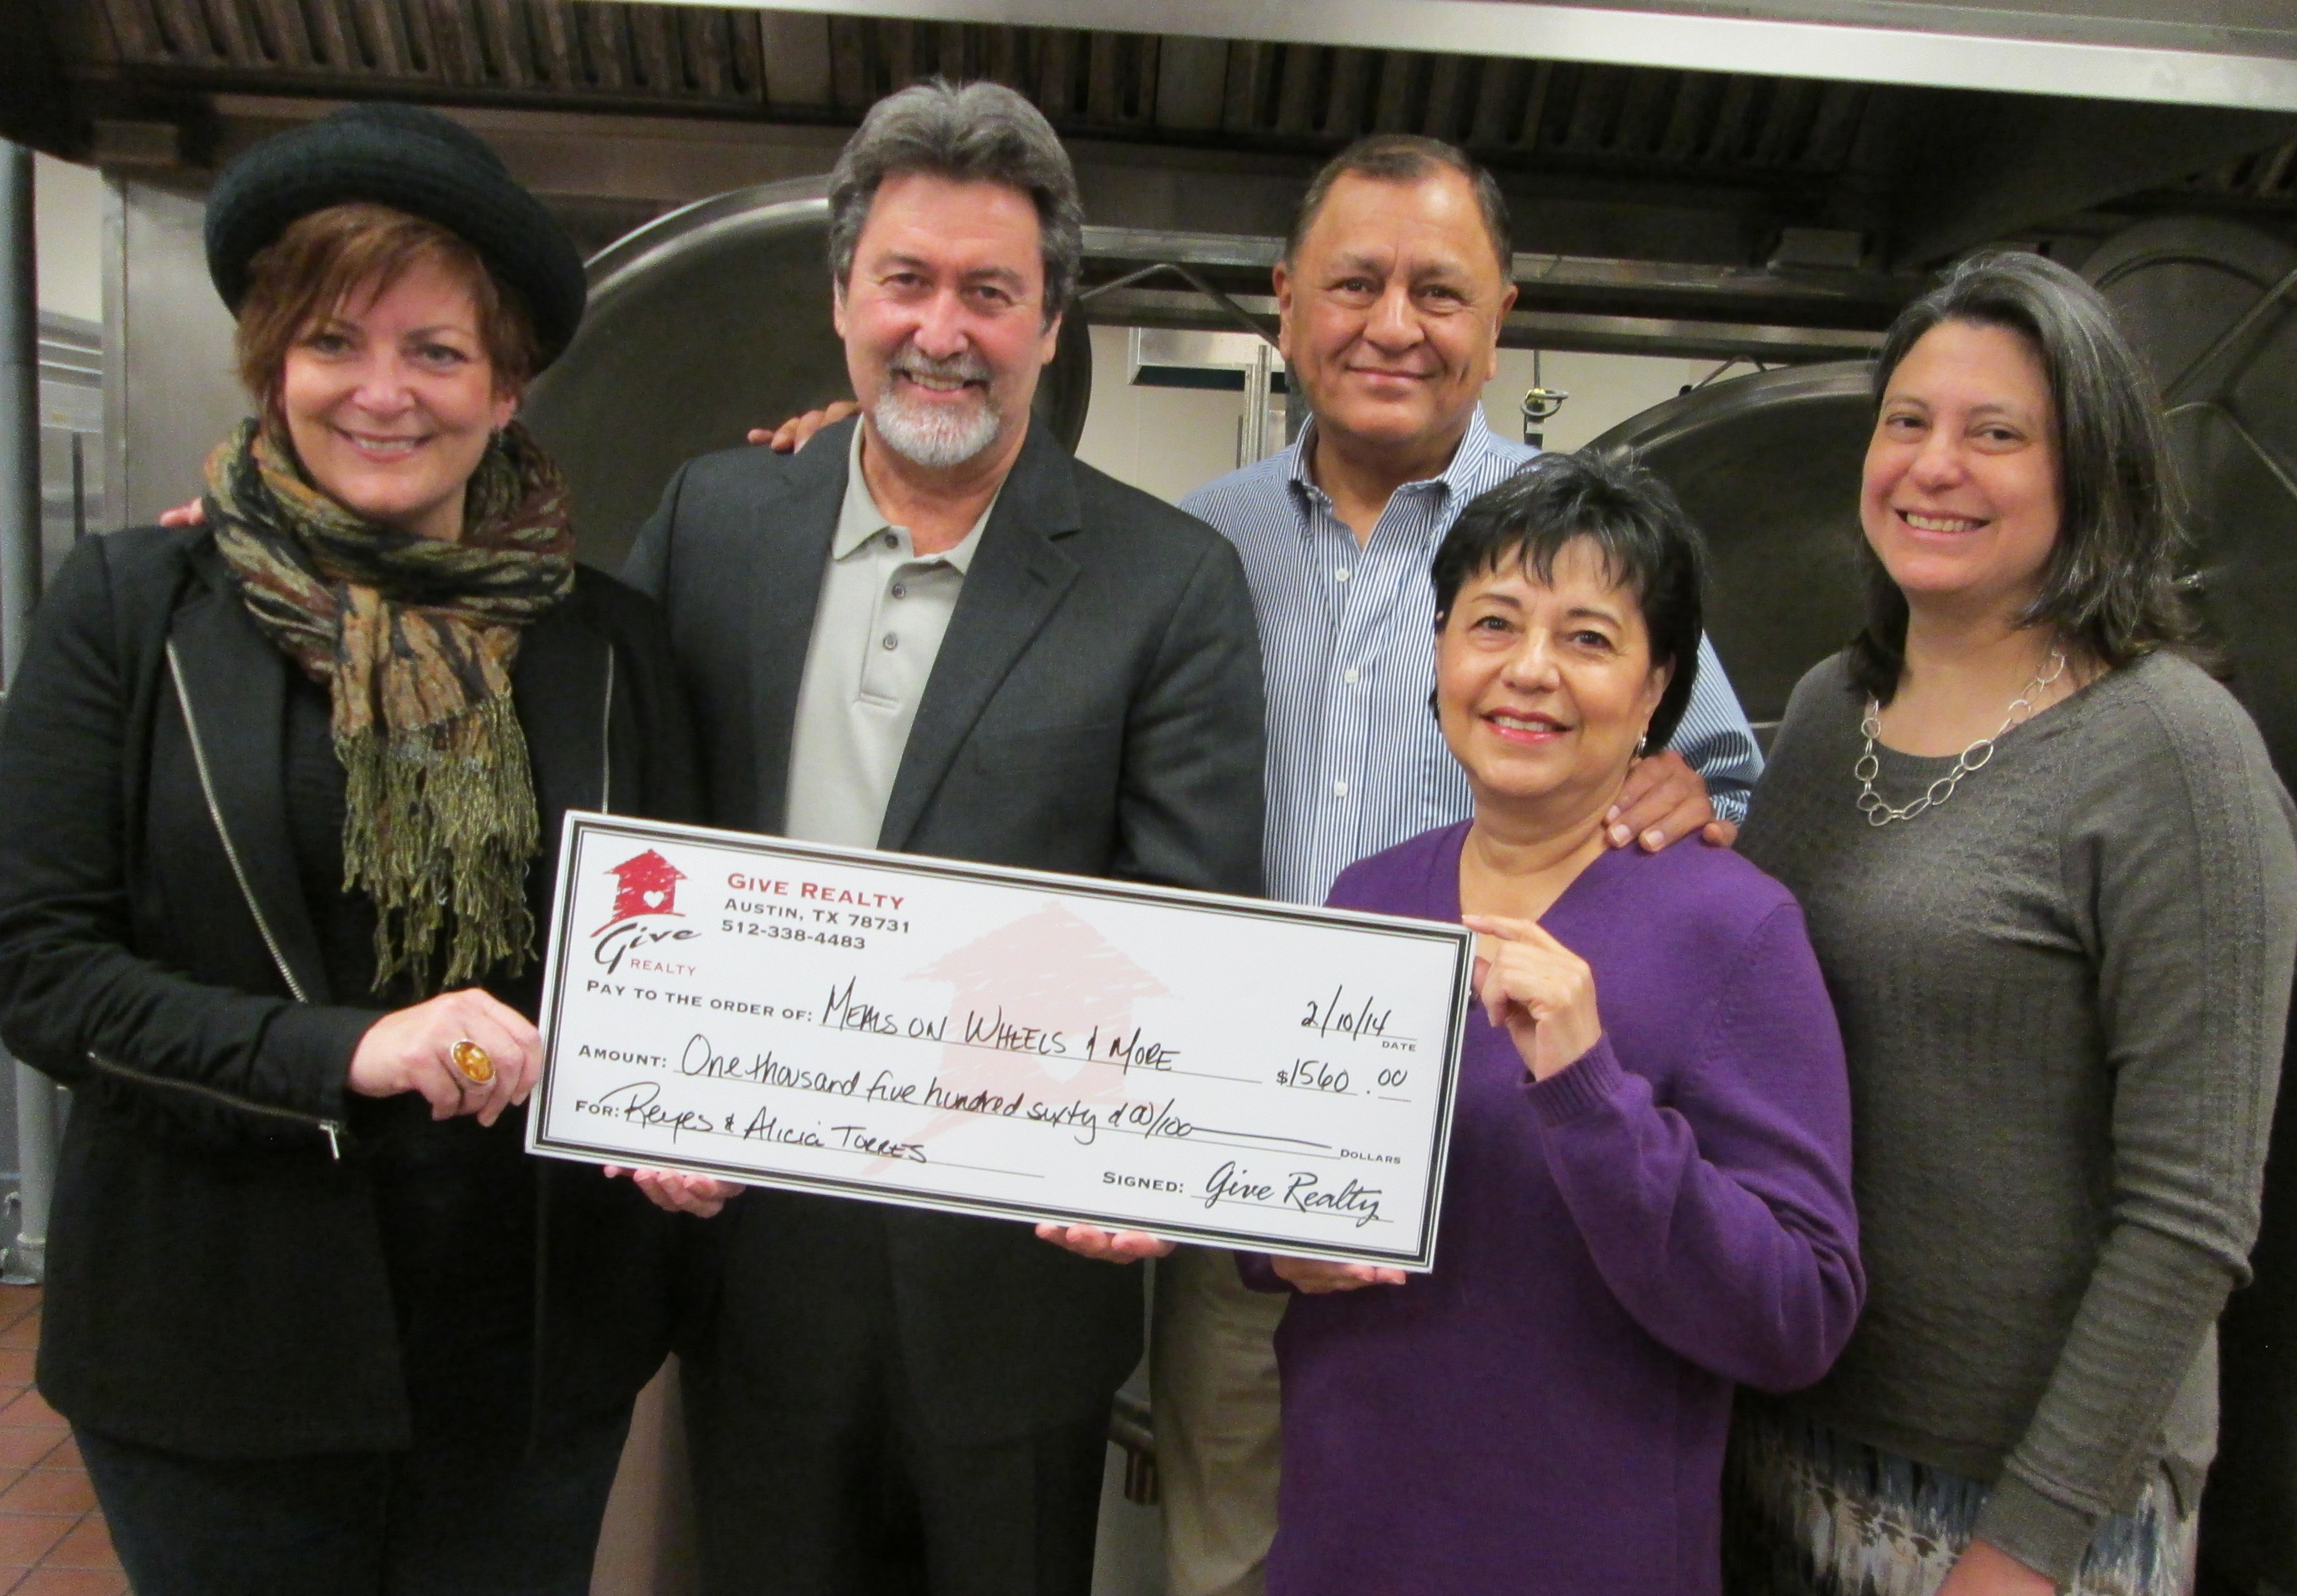 $1,560.00 Donated to Meals on Wheels and More on Behalf of Alicia and Reyes Torres